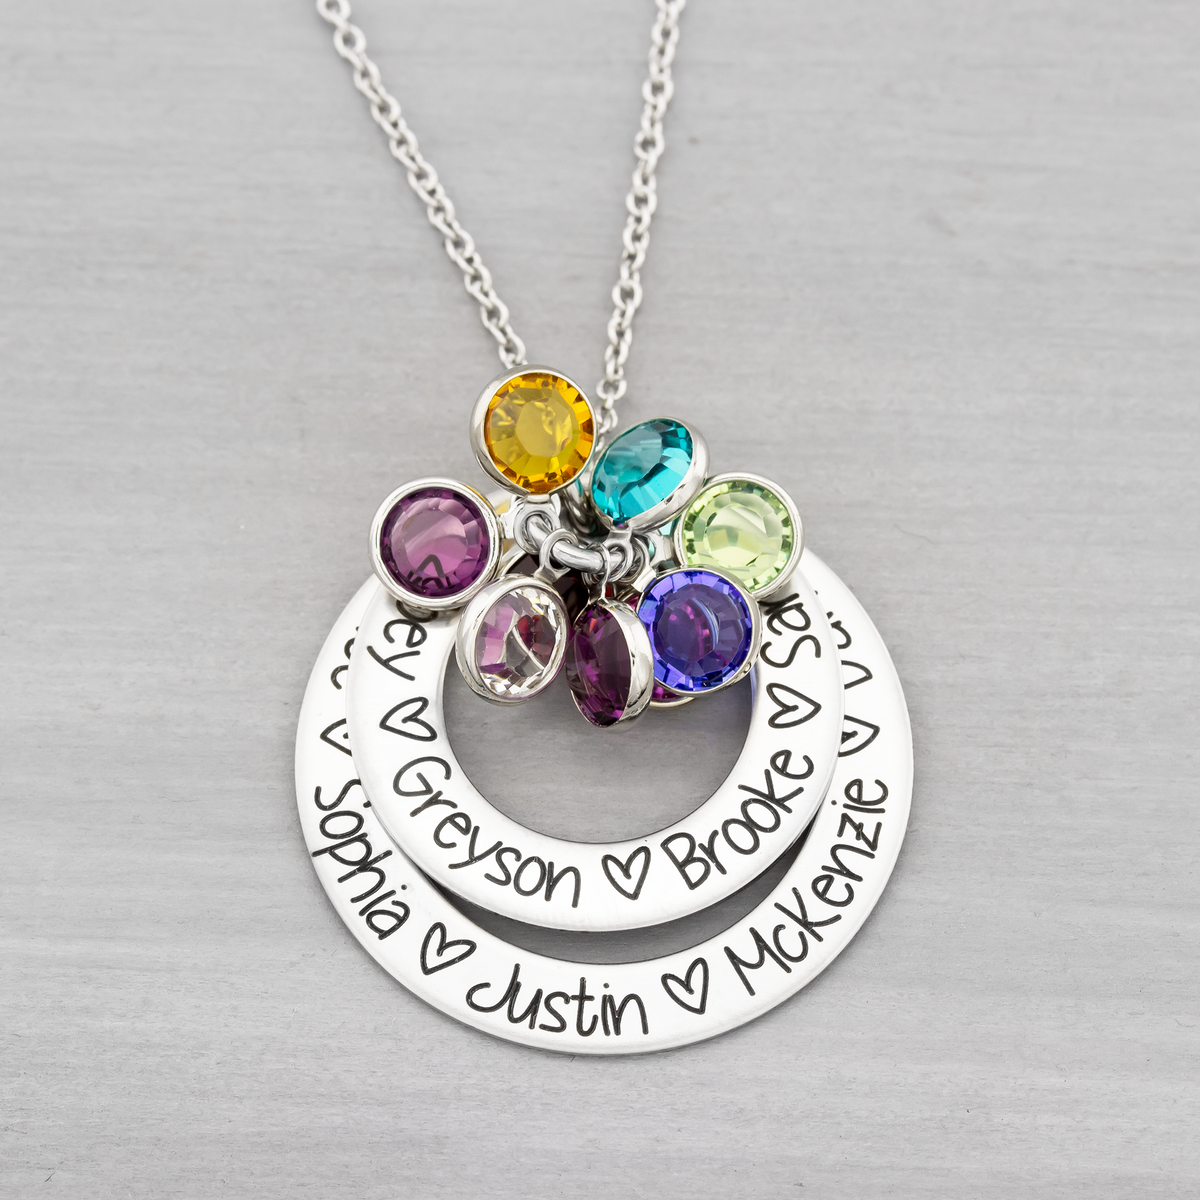 Buy Personalized Grandma Necklace, Grandmother Necklace, Birthstone Necklace,  Love My Grandchildren Necklace, Hand Stamped, Mother's Day Gift Online in  India - Etsy